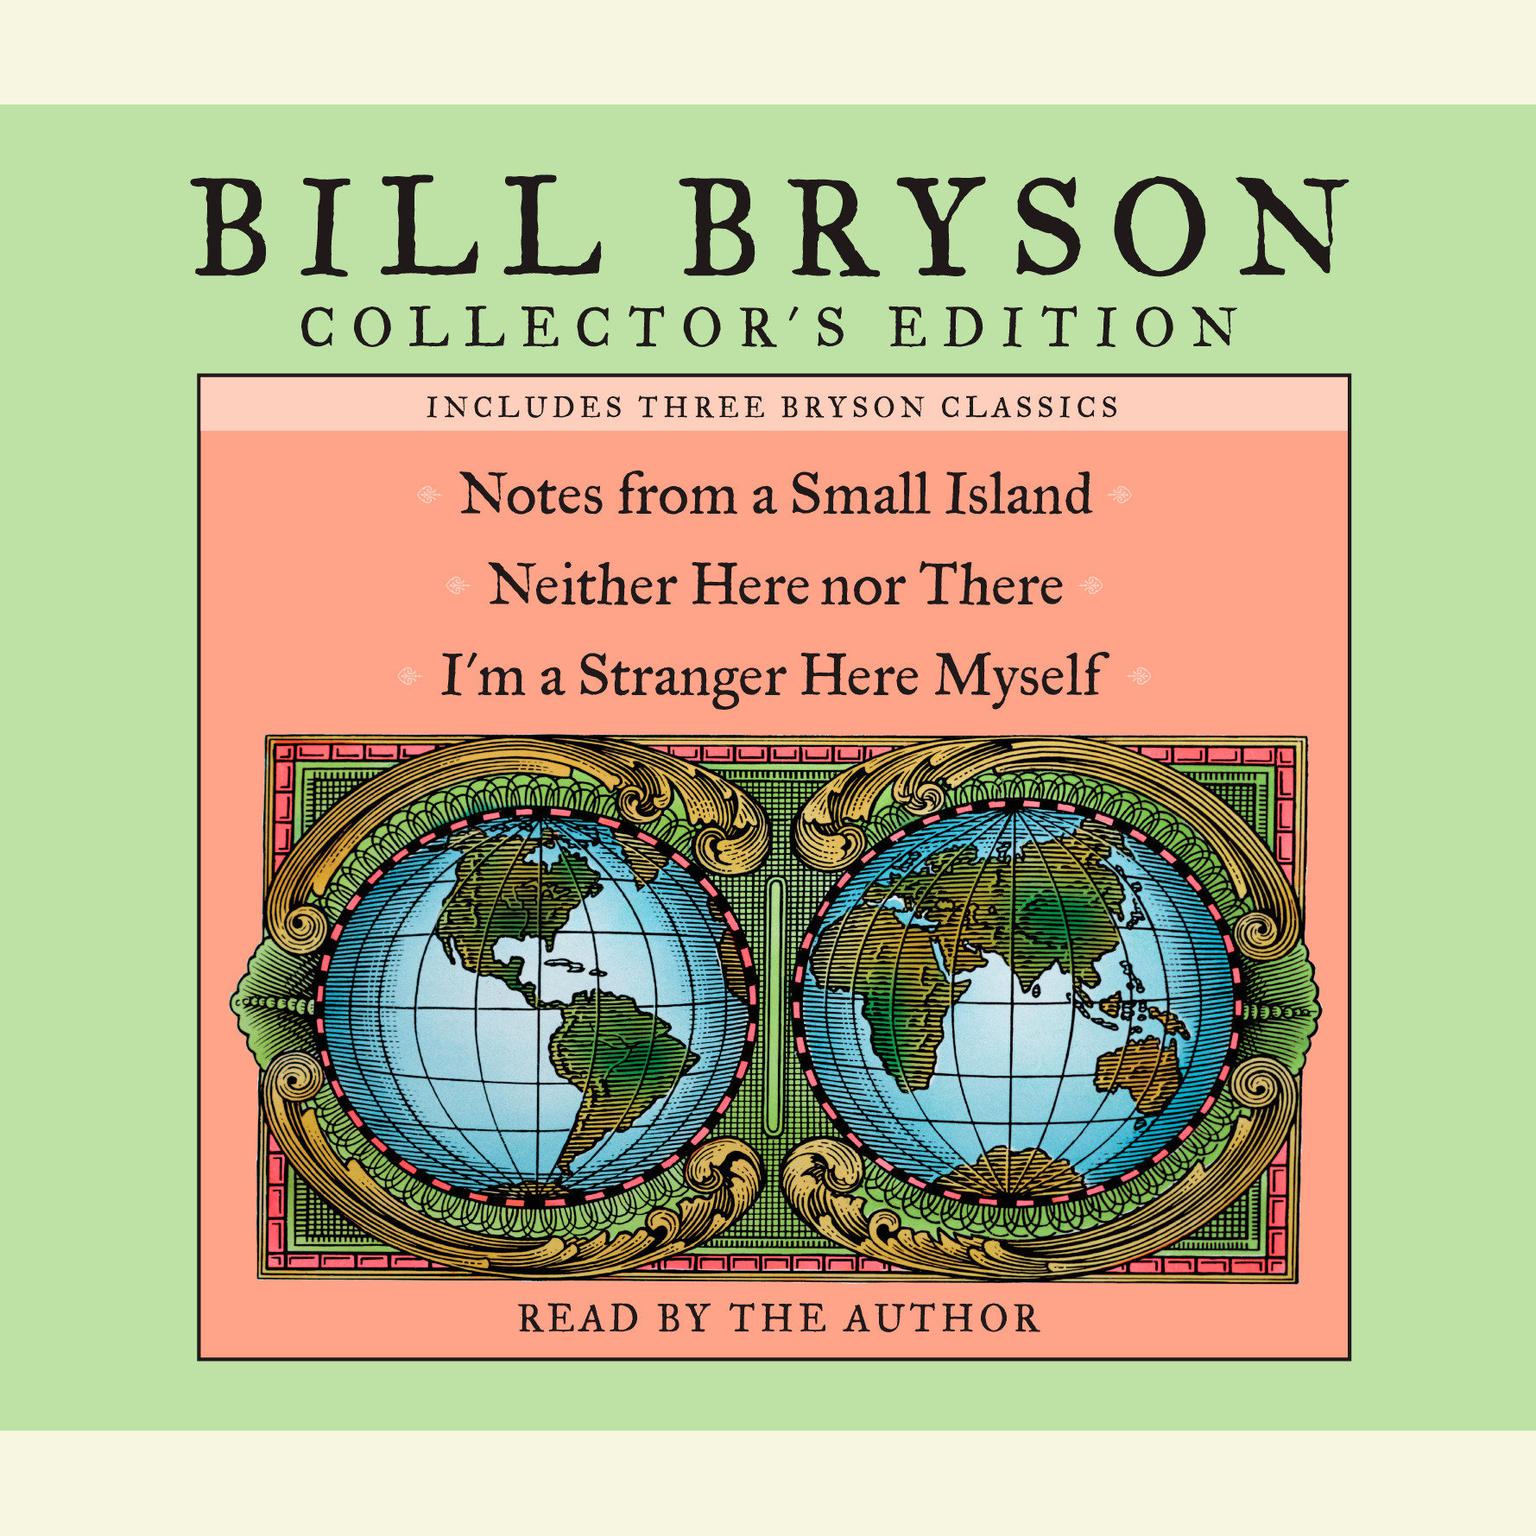 Bill Bryson Collectors Edition (Abridged): Notes from a Small Island, Neither Here Nor There, and Im a Stranger Here Myself Audiobook, by Bill Bryson